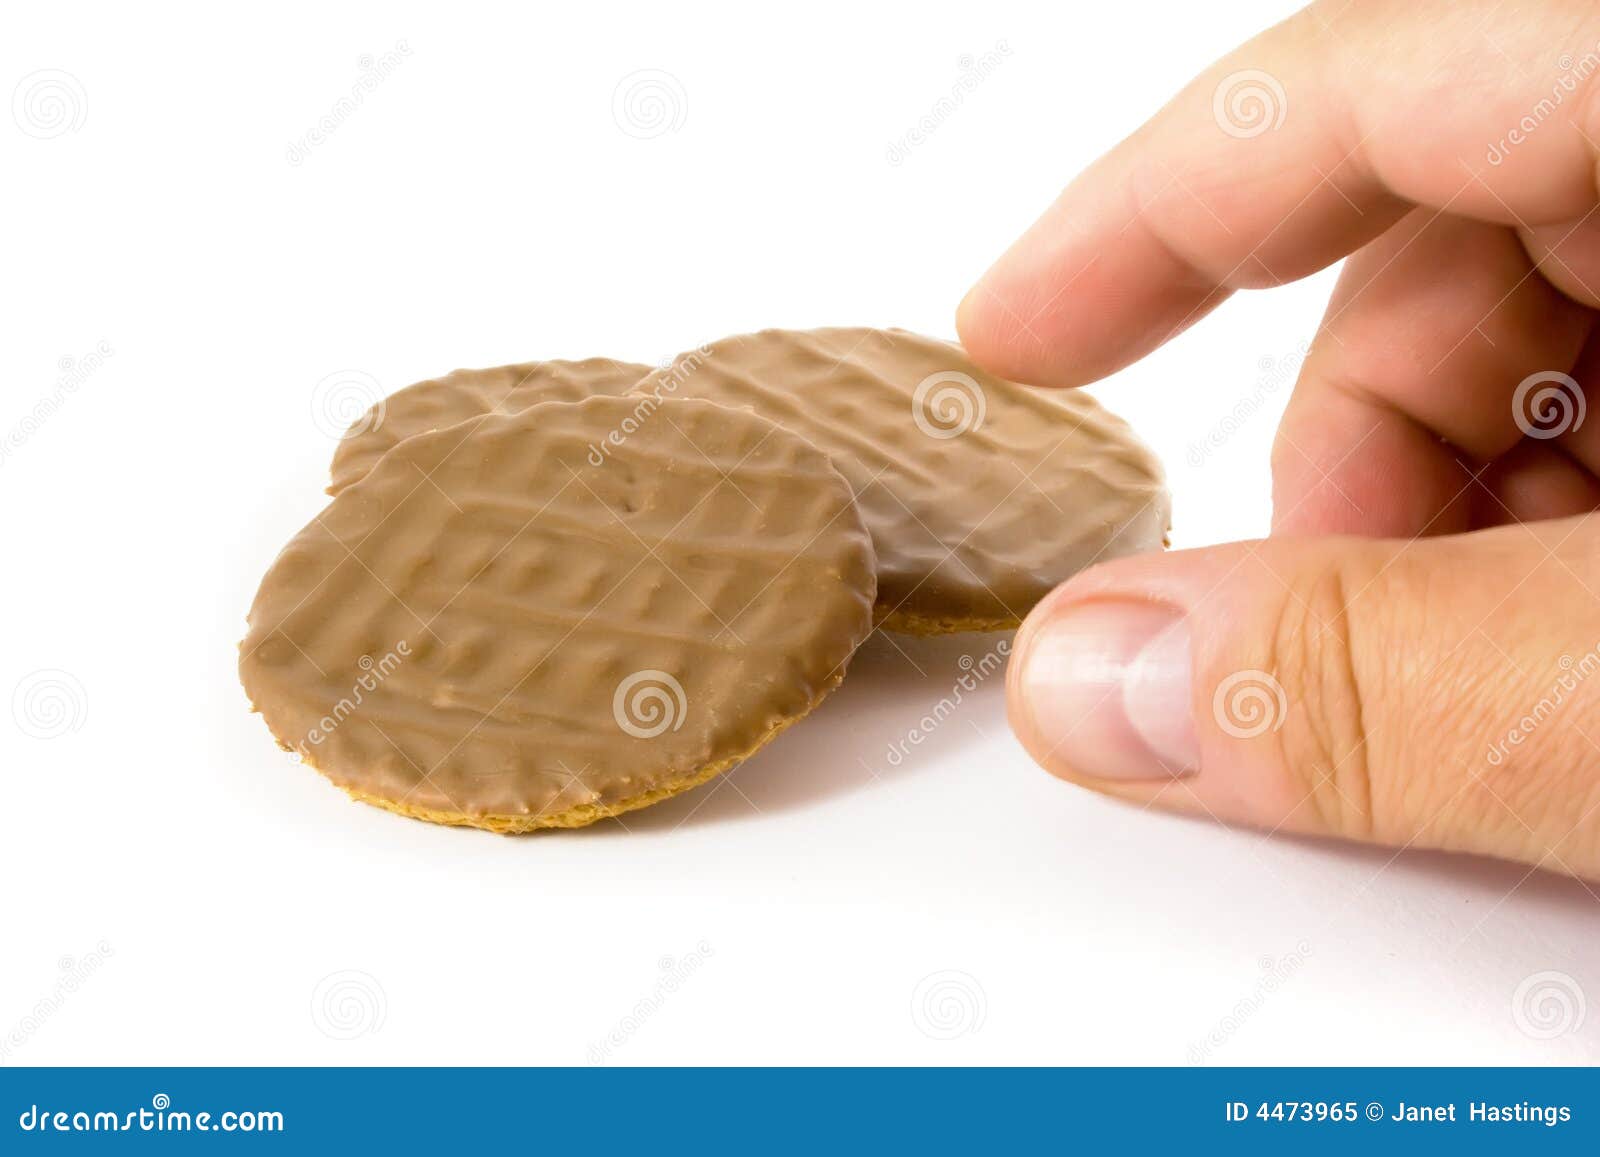 Chocolate Biscuit Temptation. Hand reaching for a delicious chocolate biscuit over white